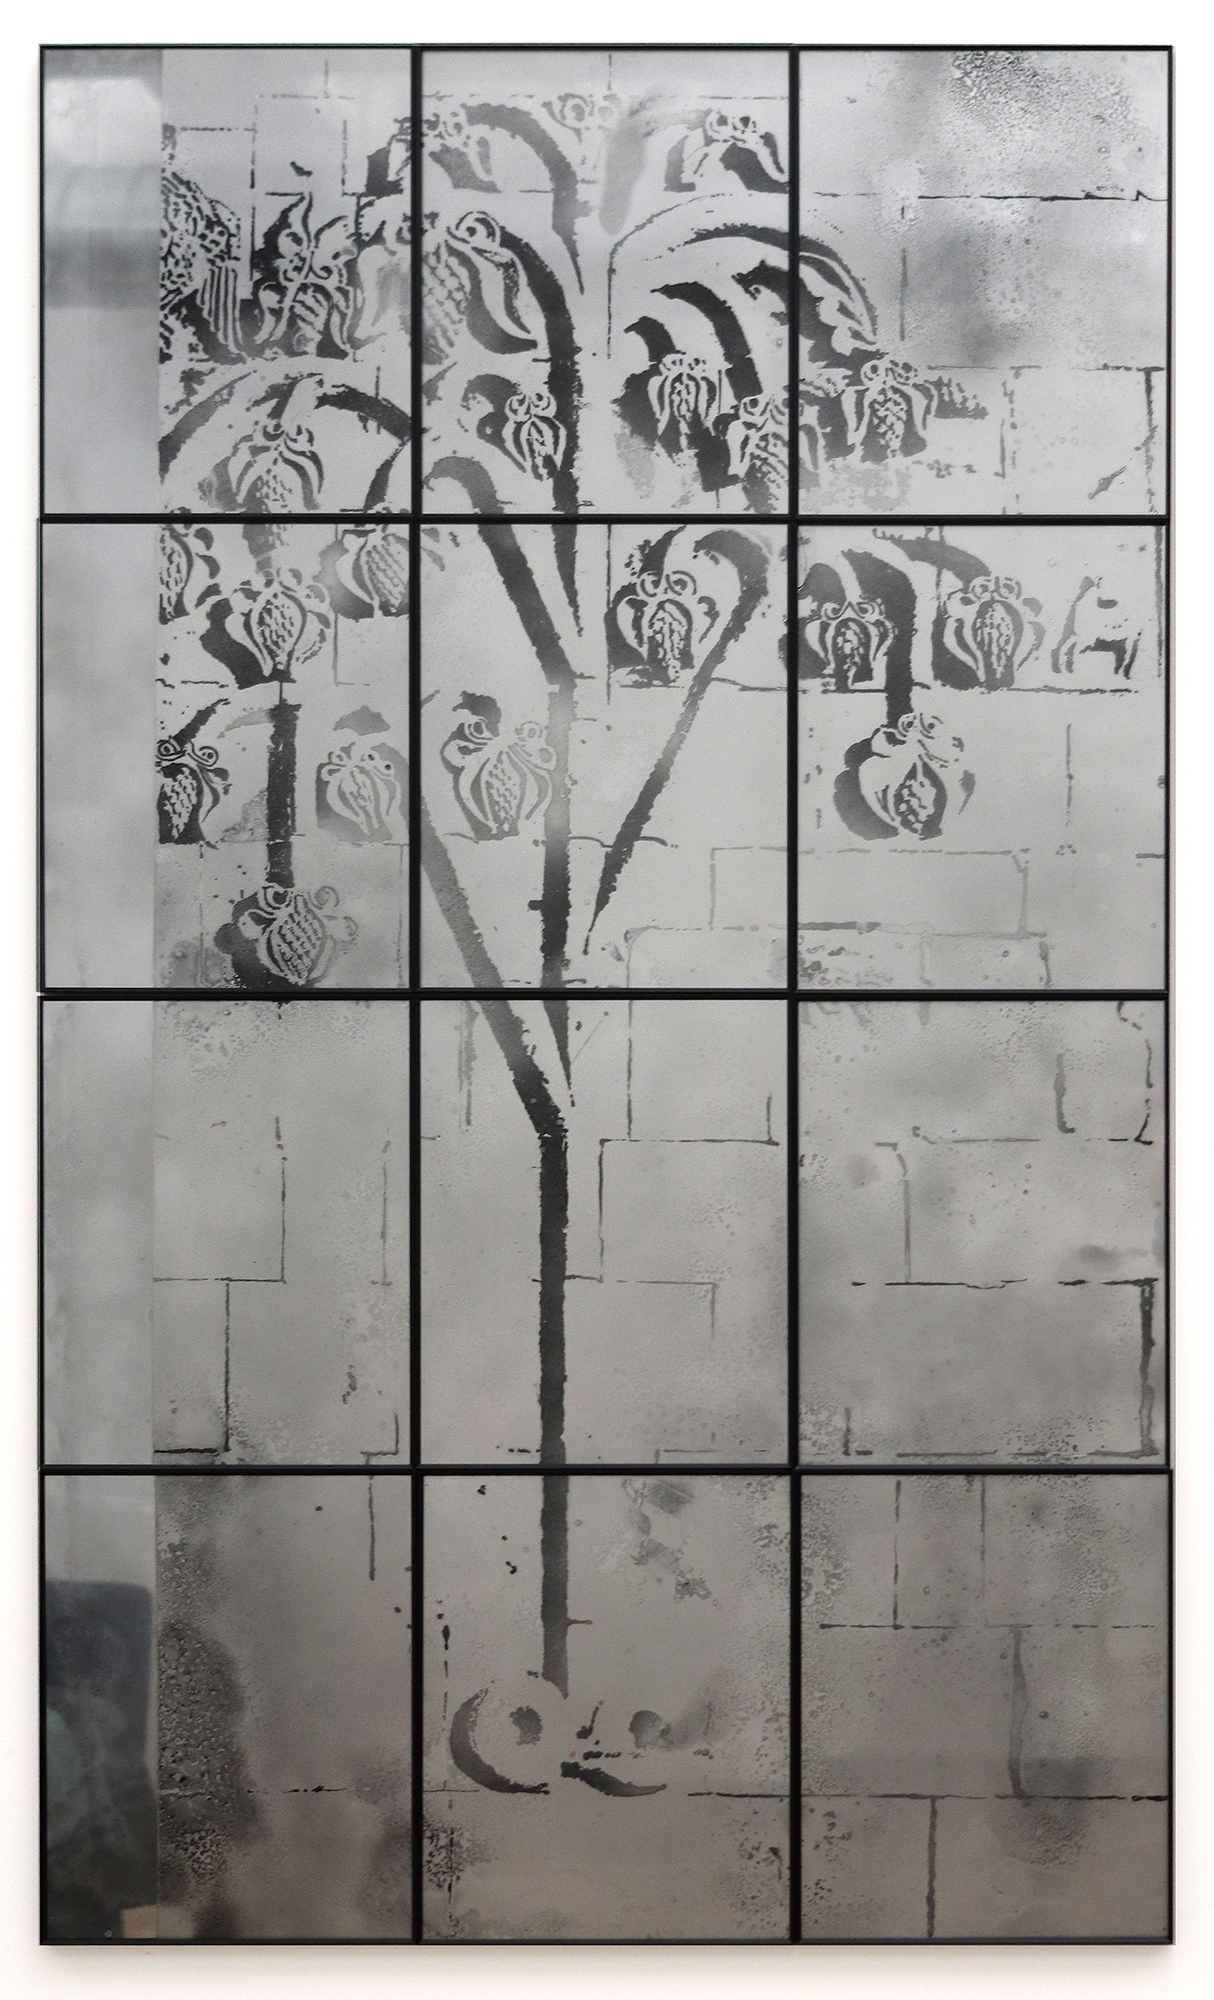 The Eastern Wall Fig. 1 (Gardens of Eurasia), 2022, Hand-painted liquid mirror and enamel on glass in aluminum frame, Twelve panels, overall 56.5 x 33.5 inches.
Image courtesy the artist and Fridman Gallery, NY.